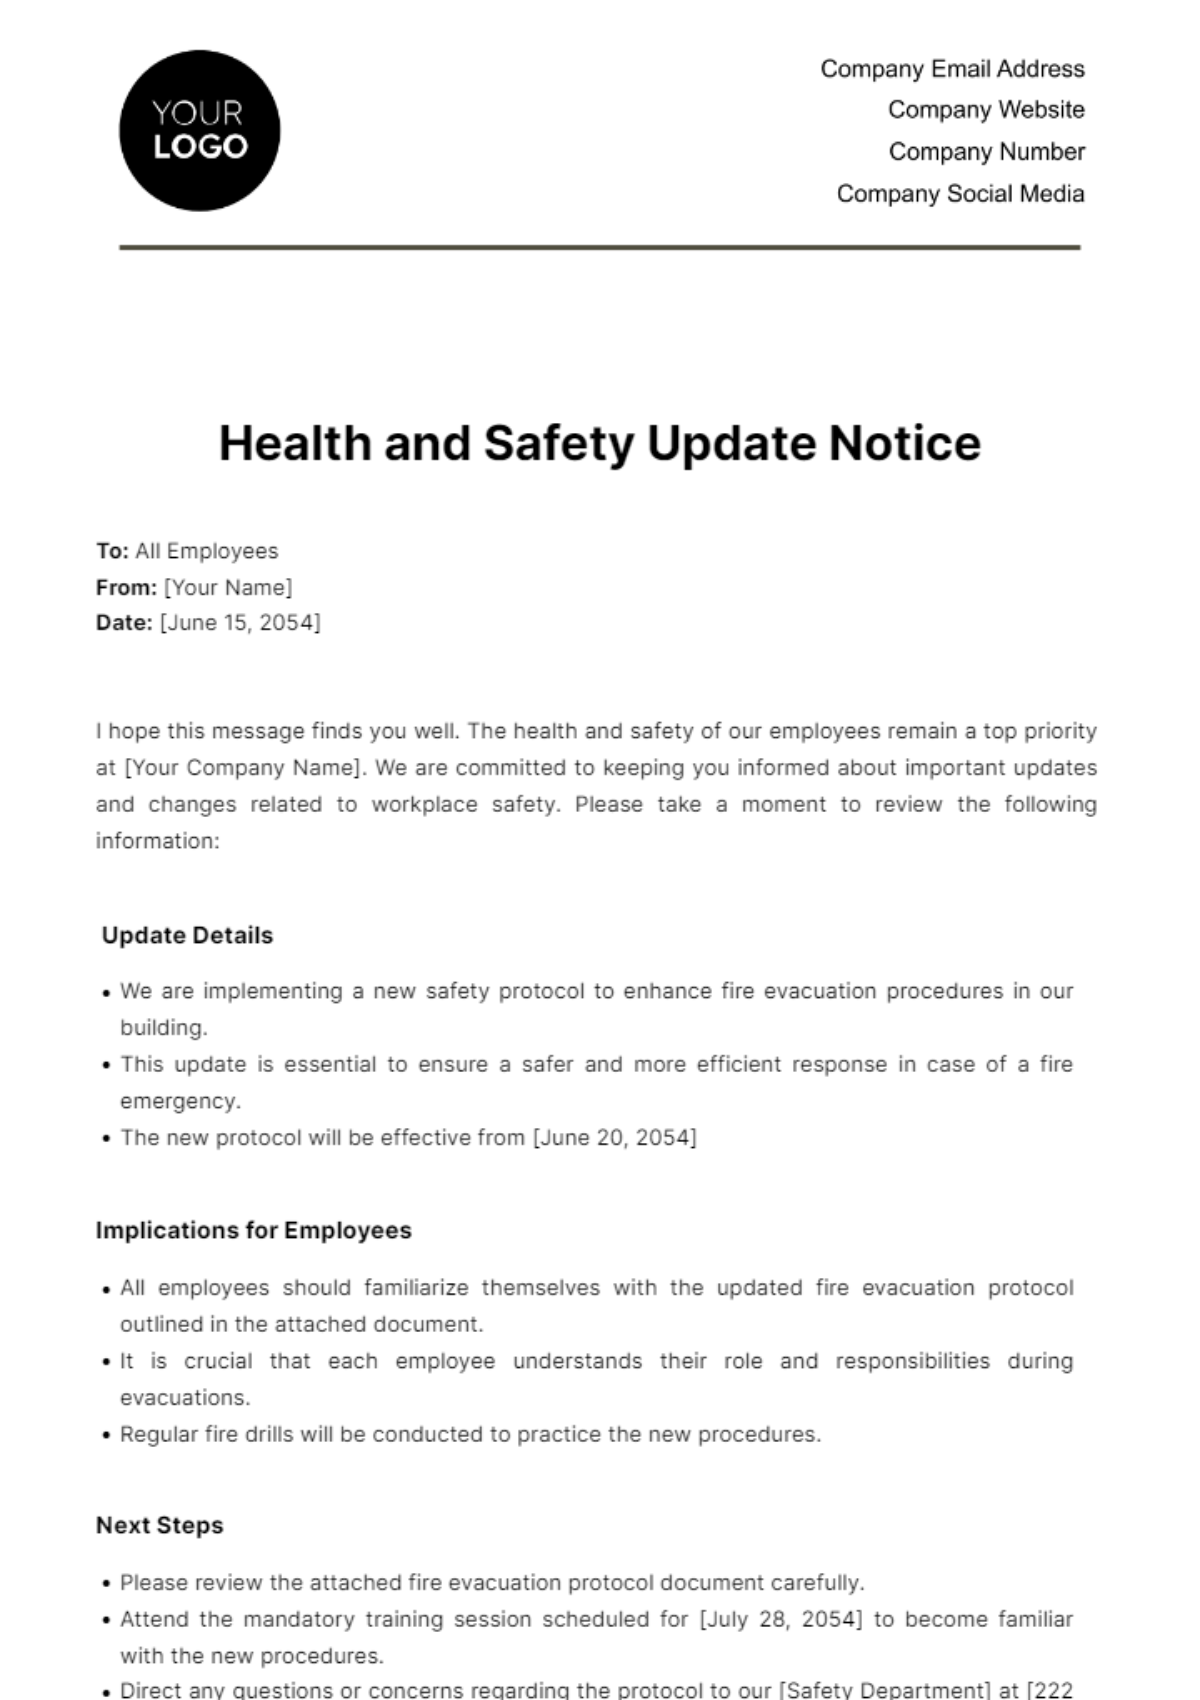 Free Health and Safety Update Notice HR Template